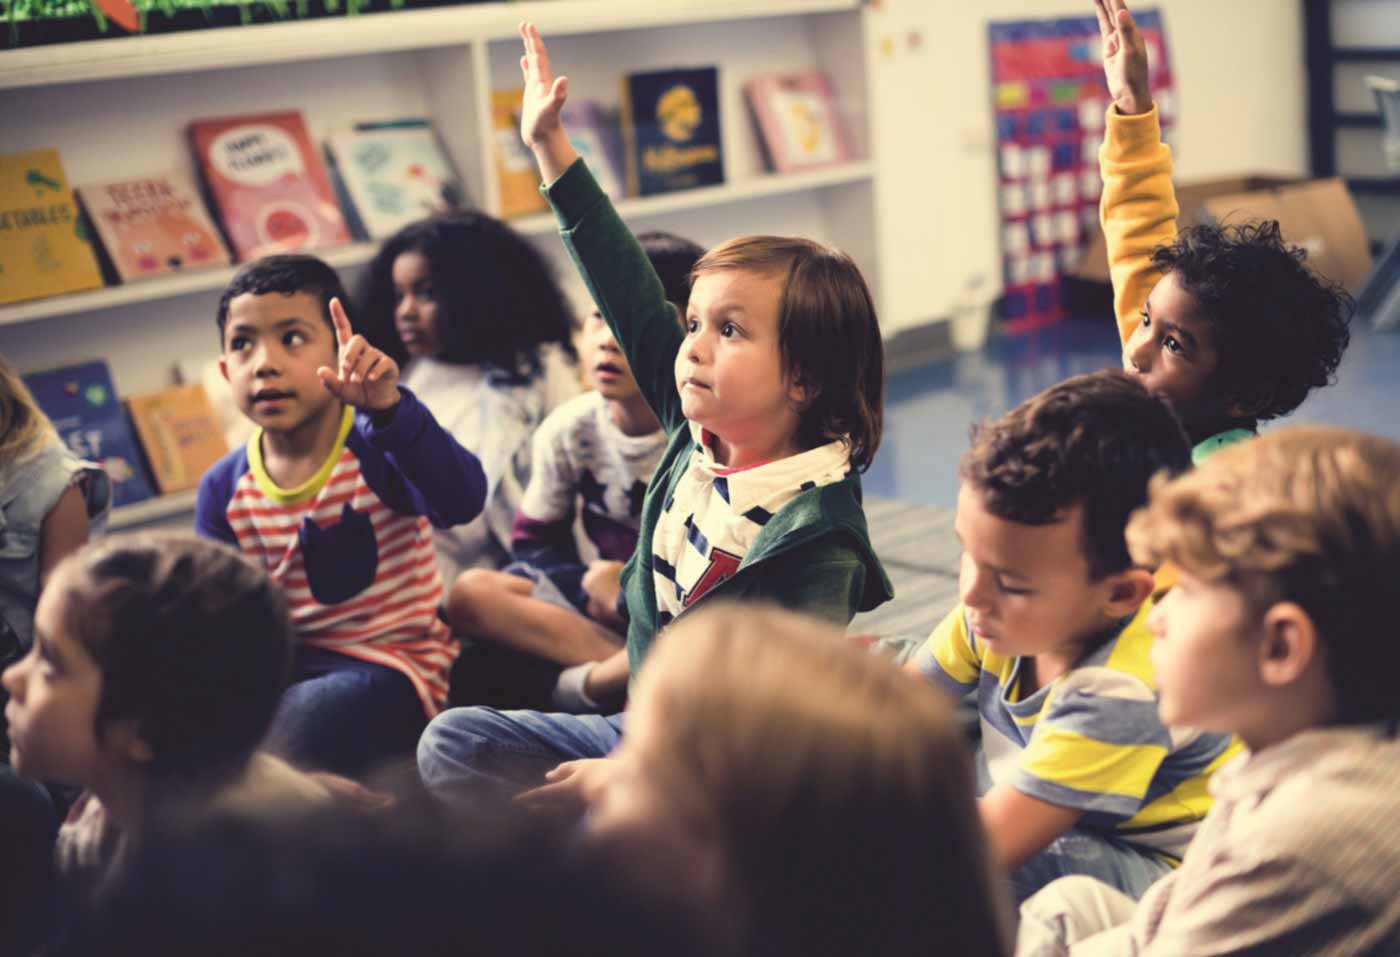 Children raise their hands to answer a question in a classroom